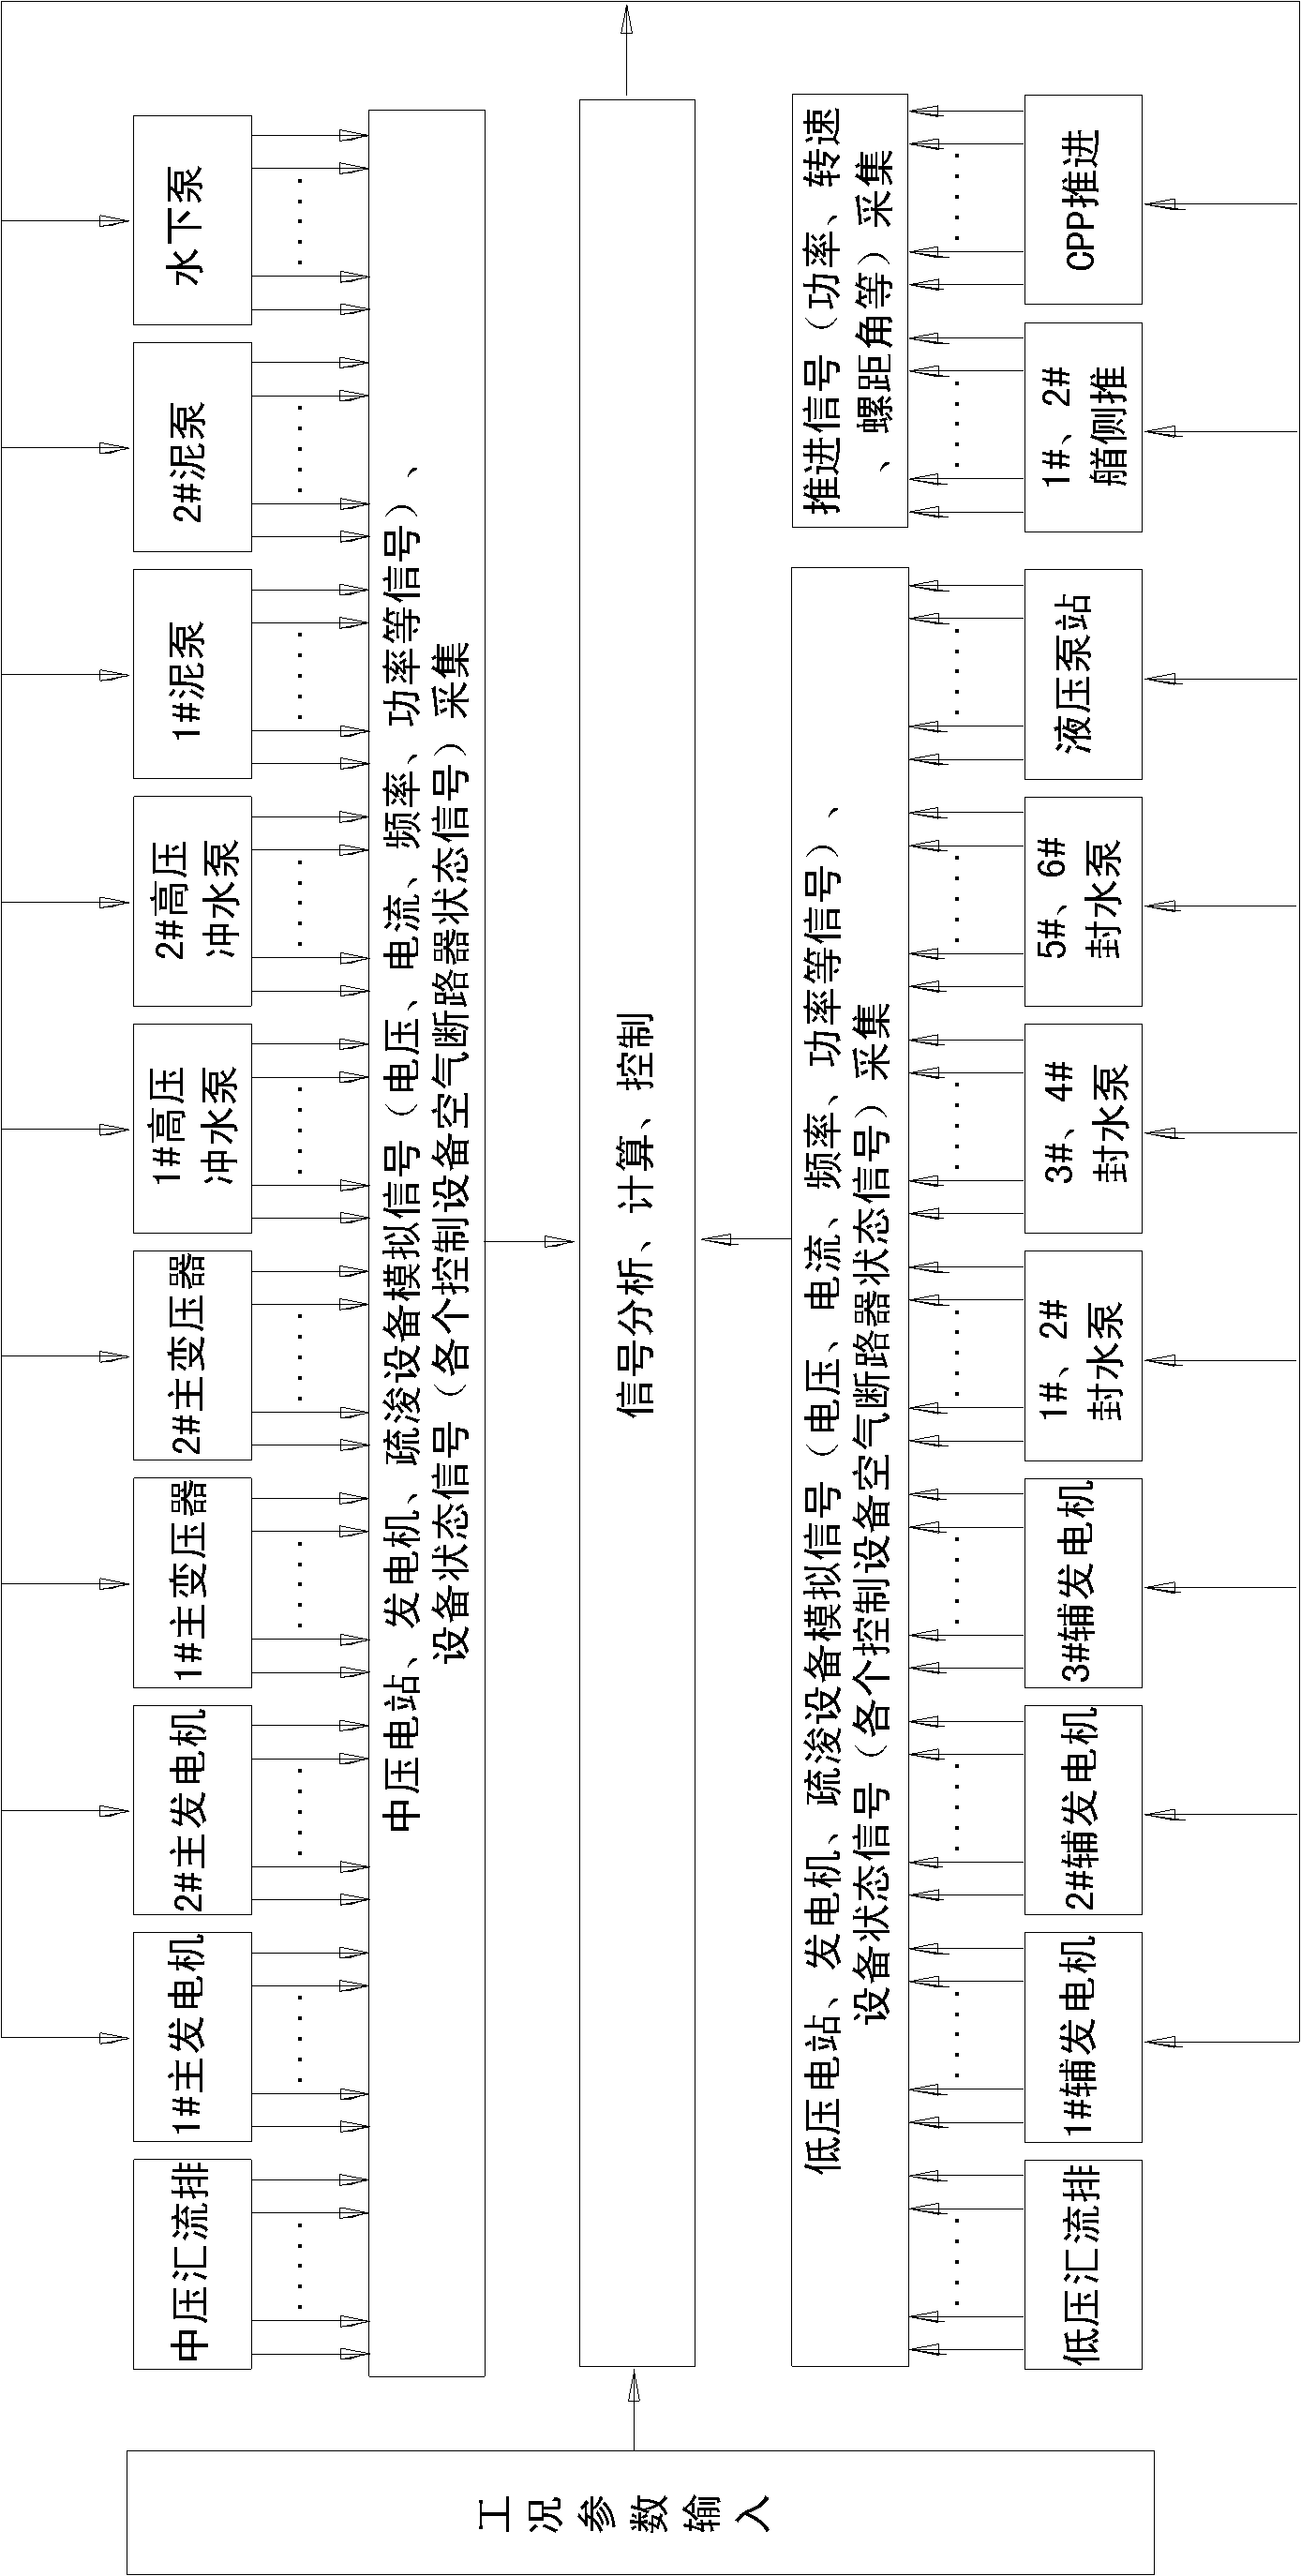 Power control system and power adjustment method for drag suction dredger